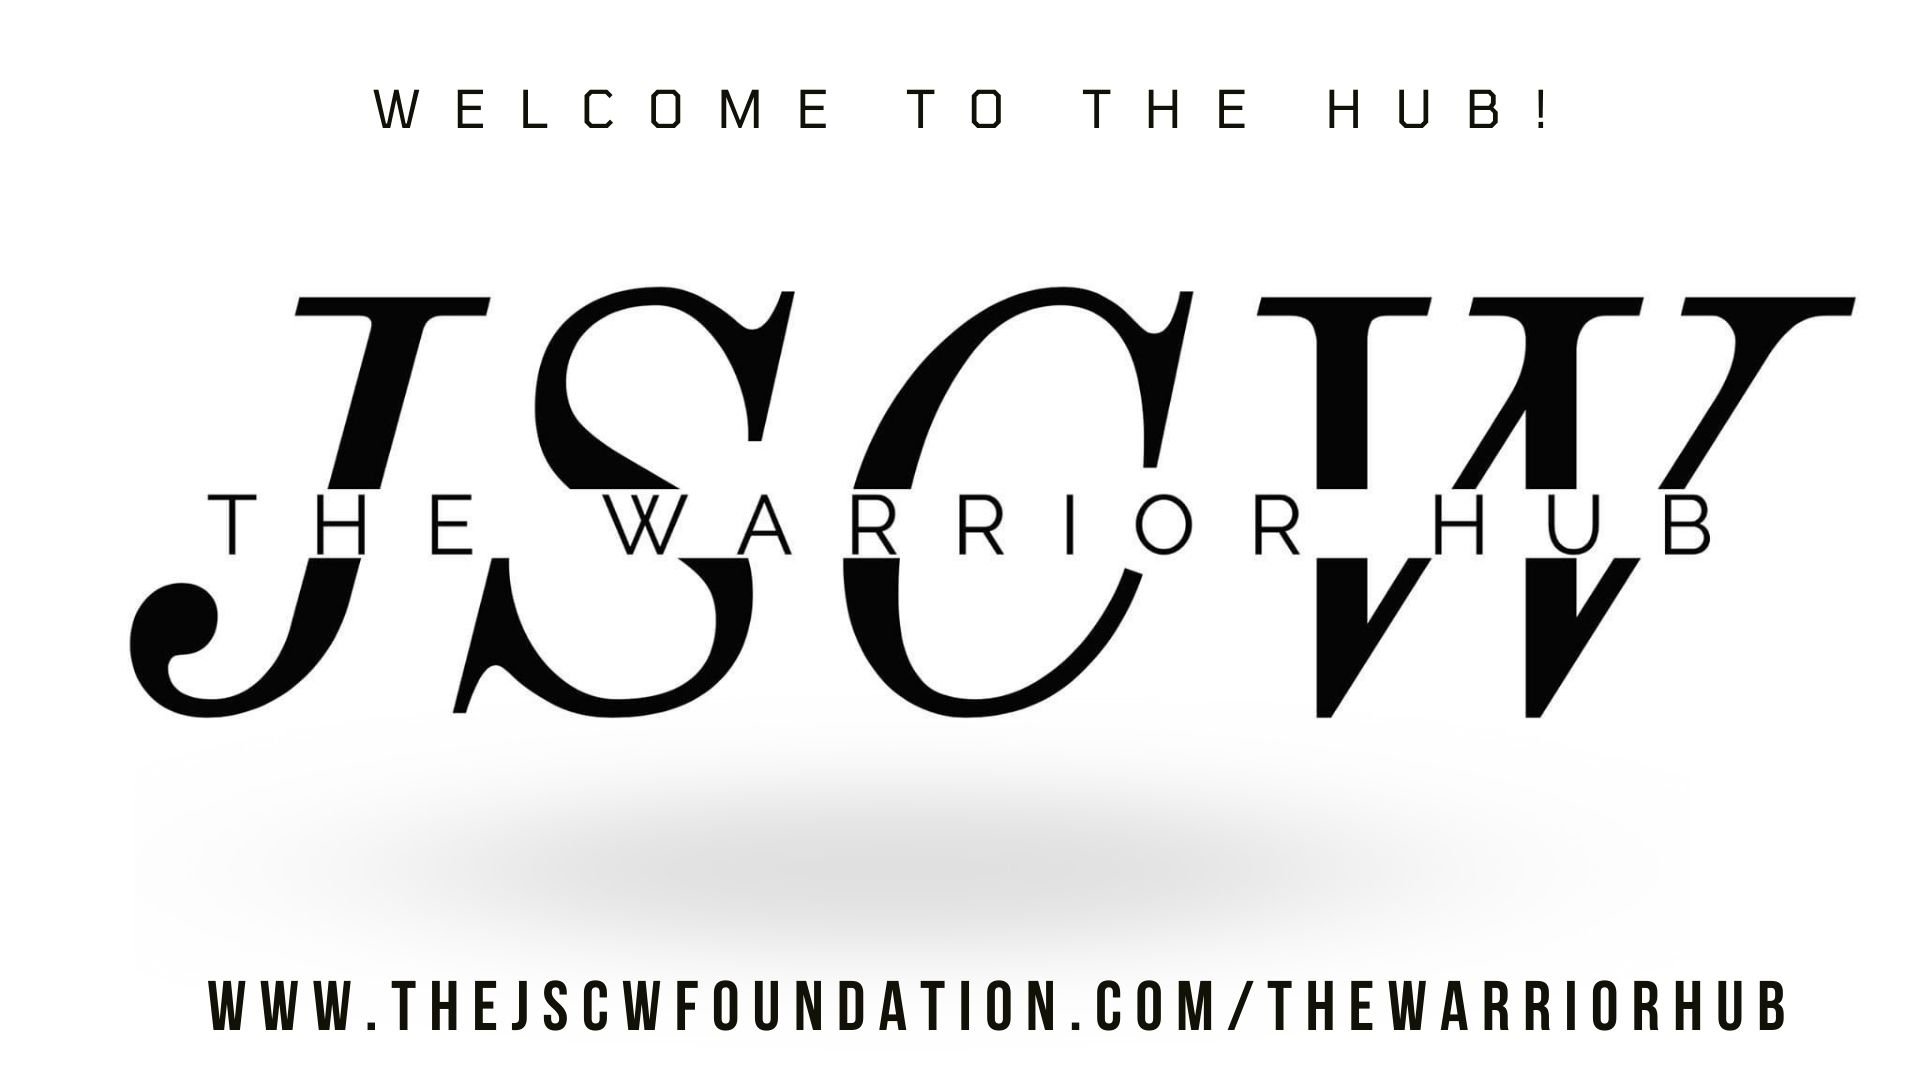 Welcome to the Warriors Hub